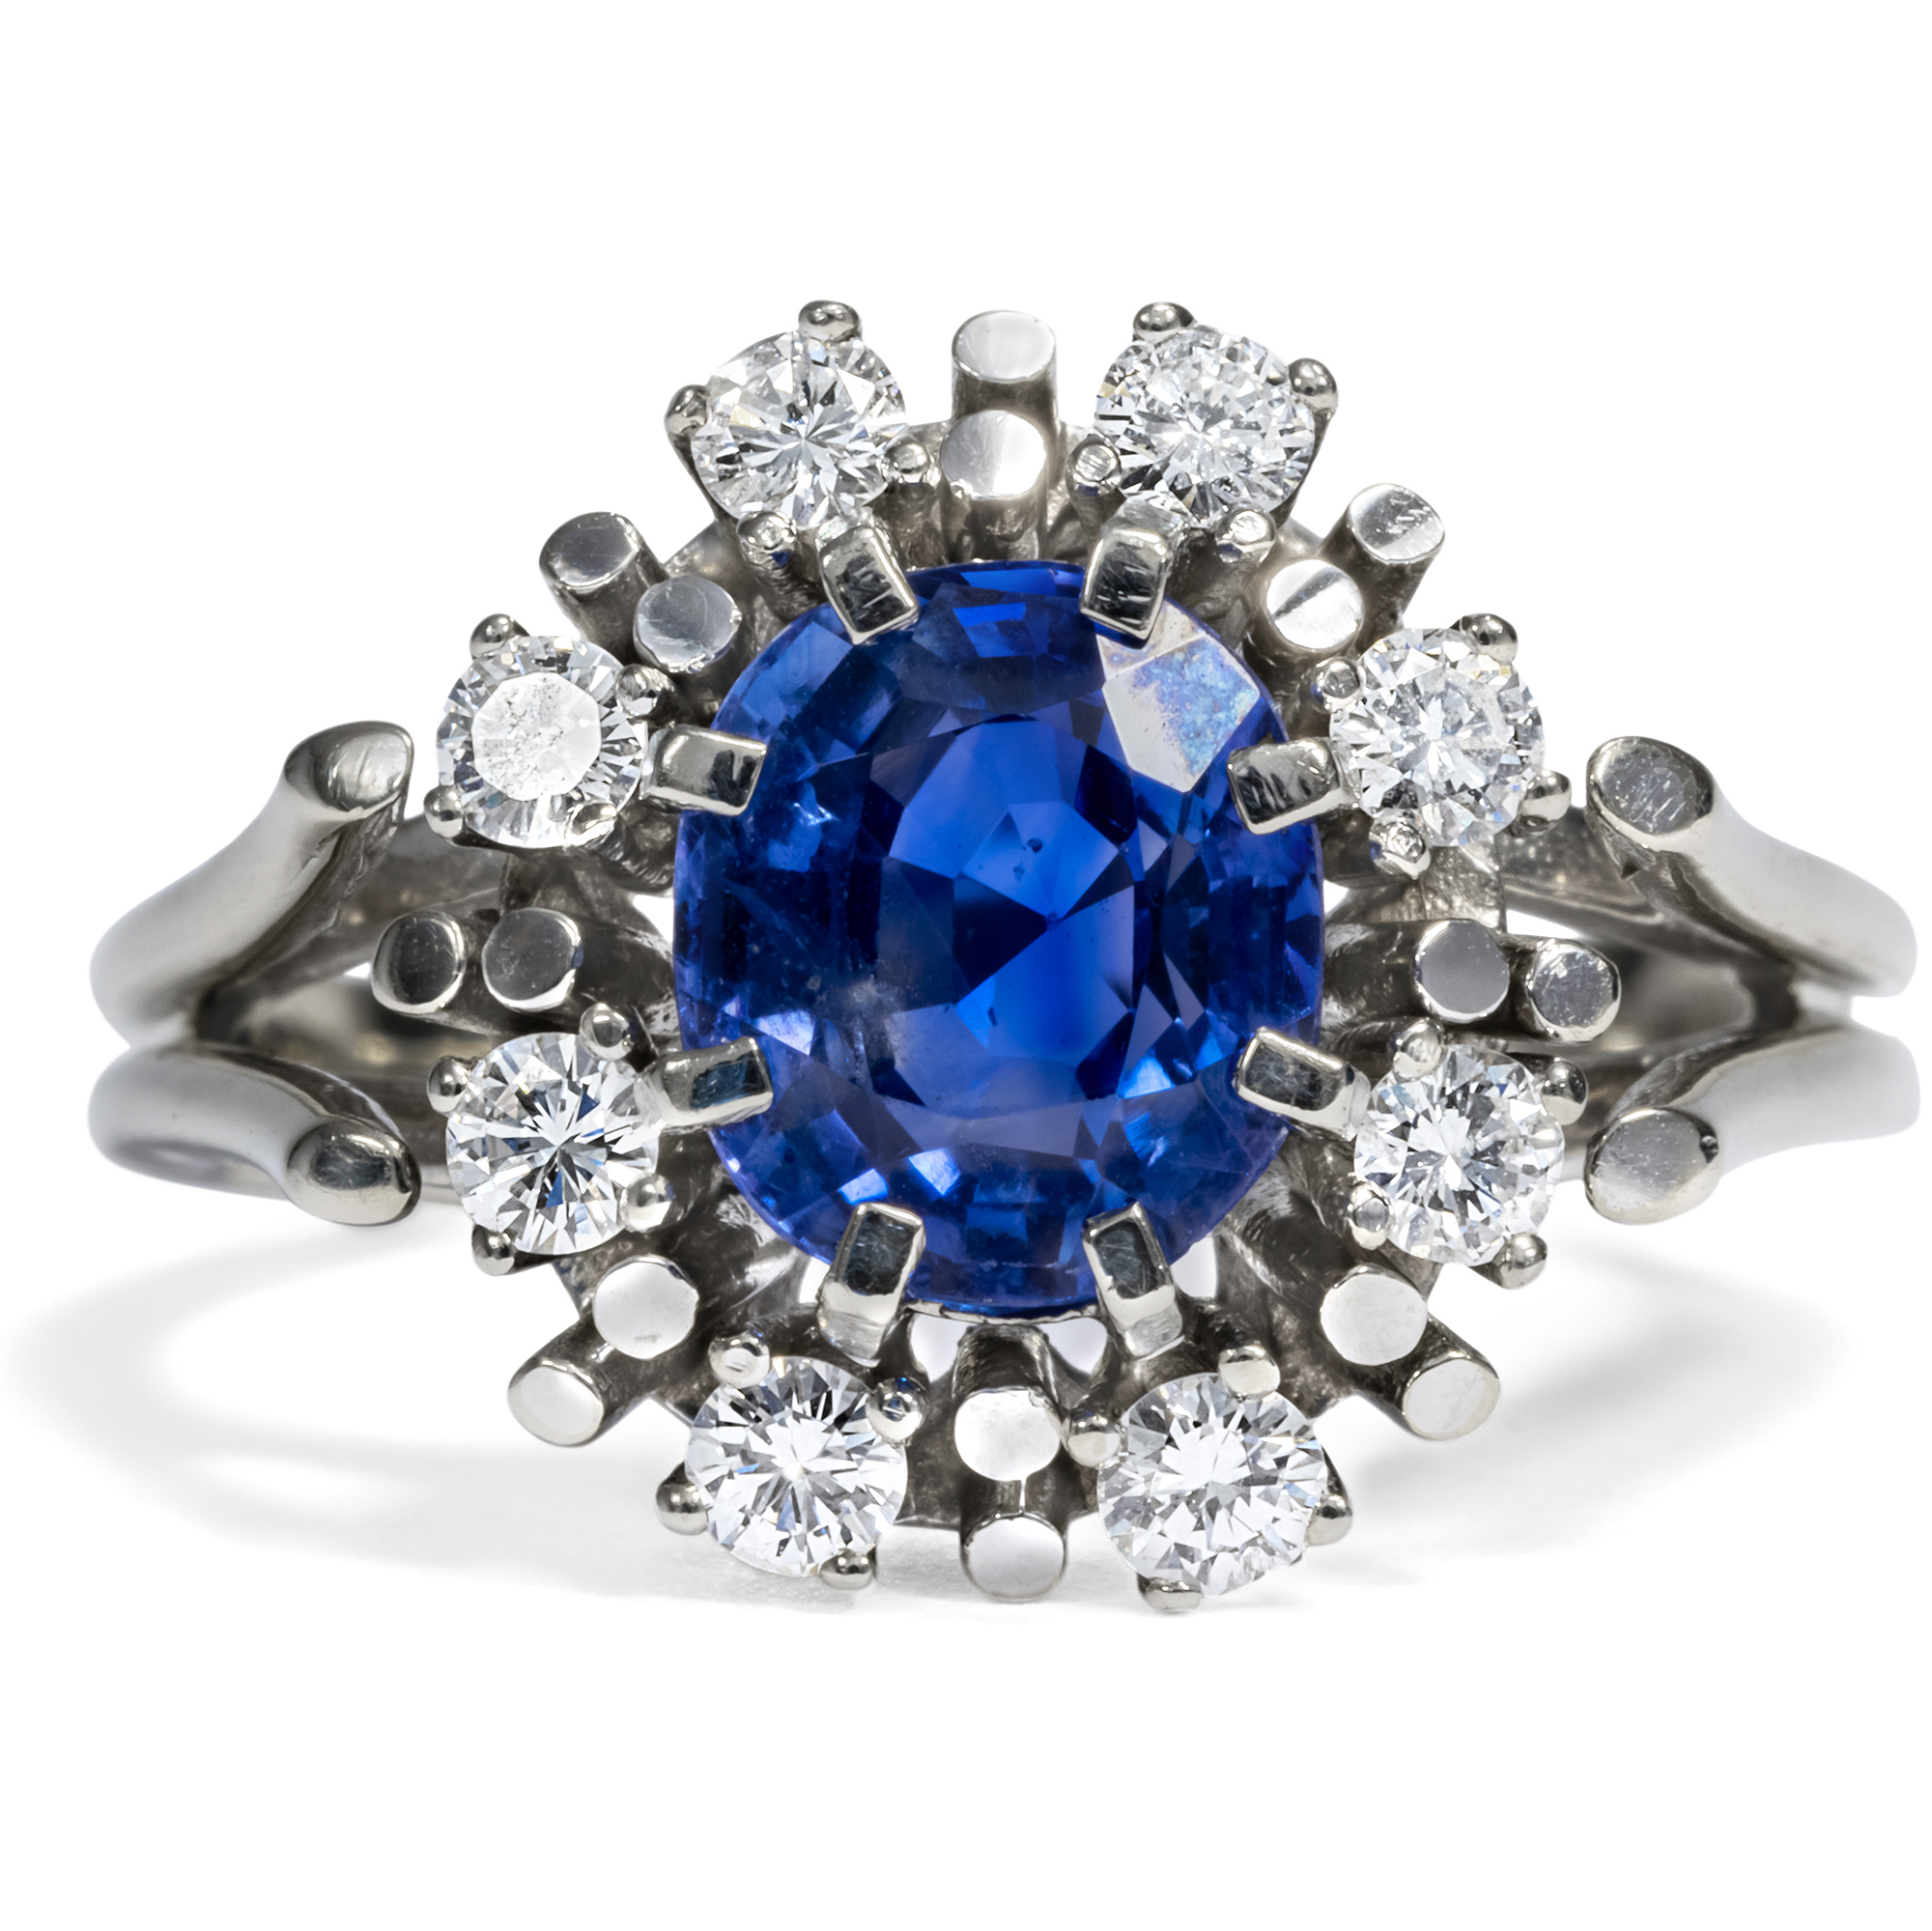 Luxurious Vintage Cluster Ring with Sapphire & Diamonds in White Gold, circa 1970